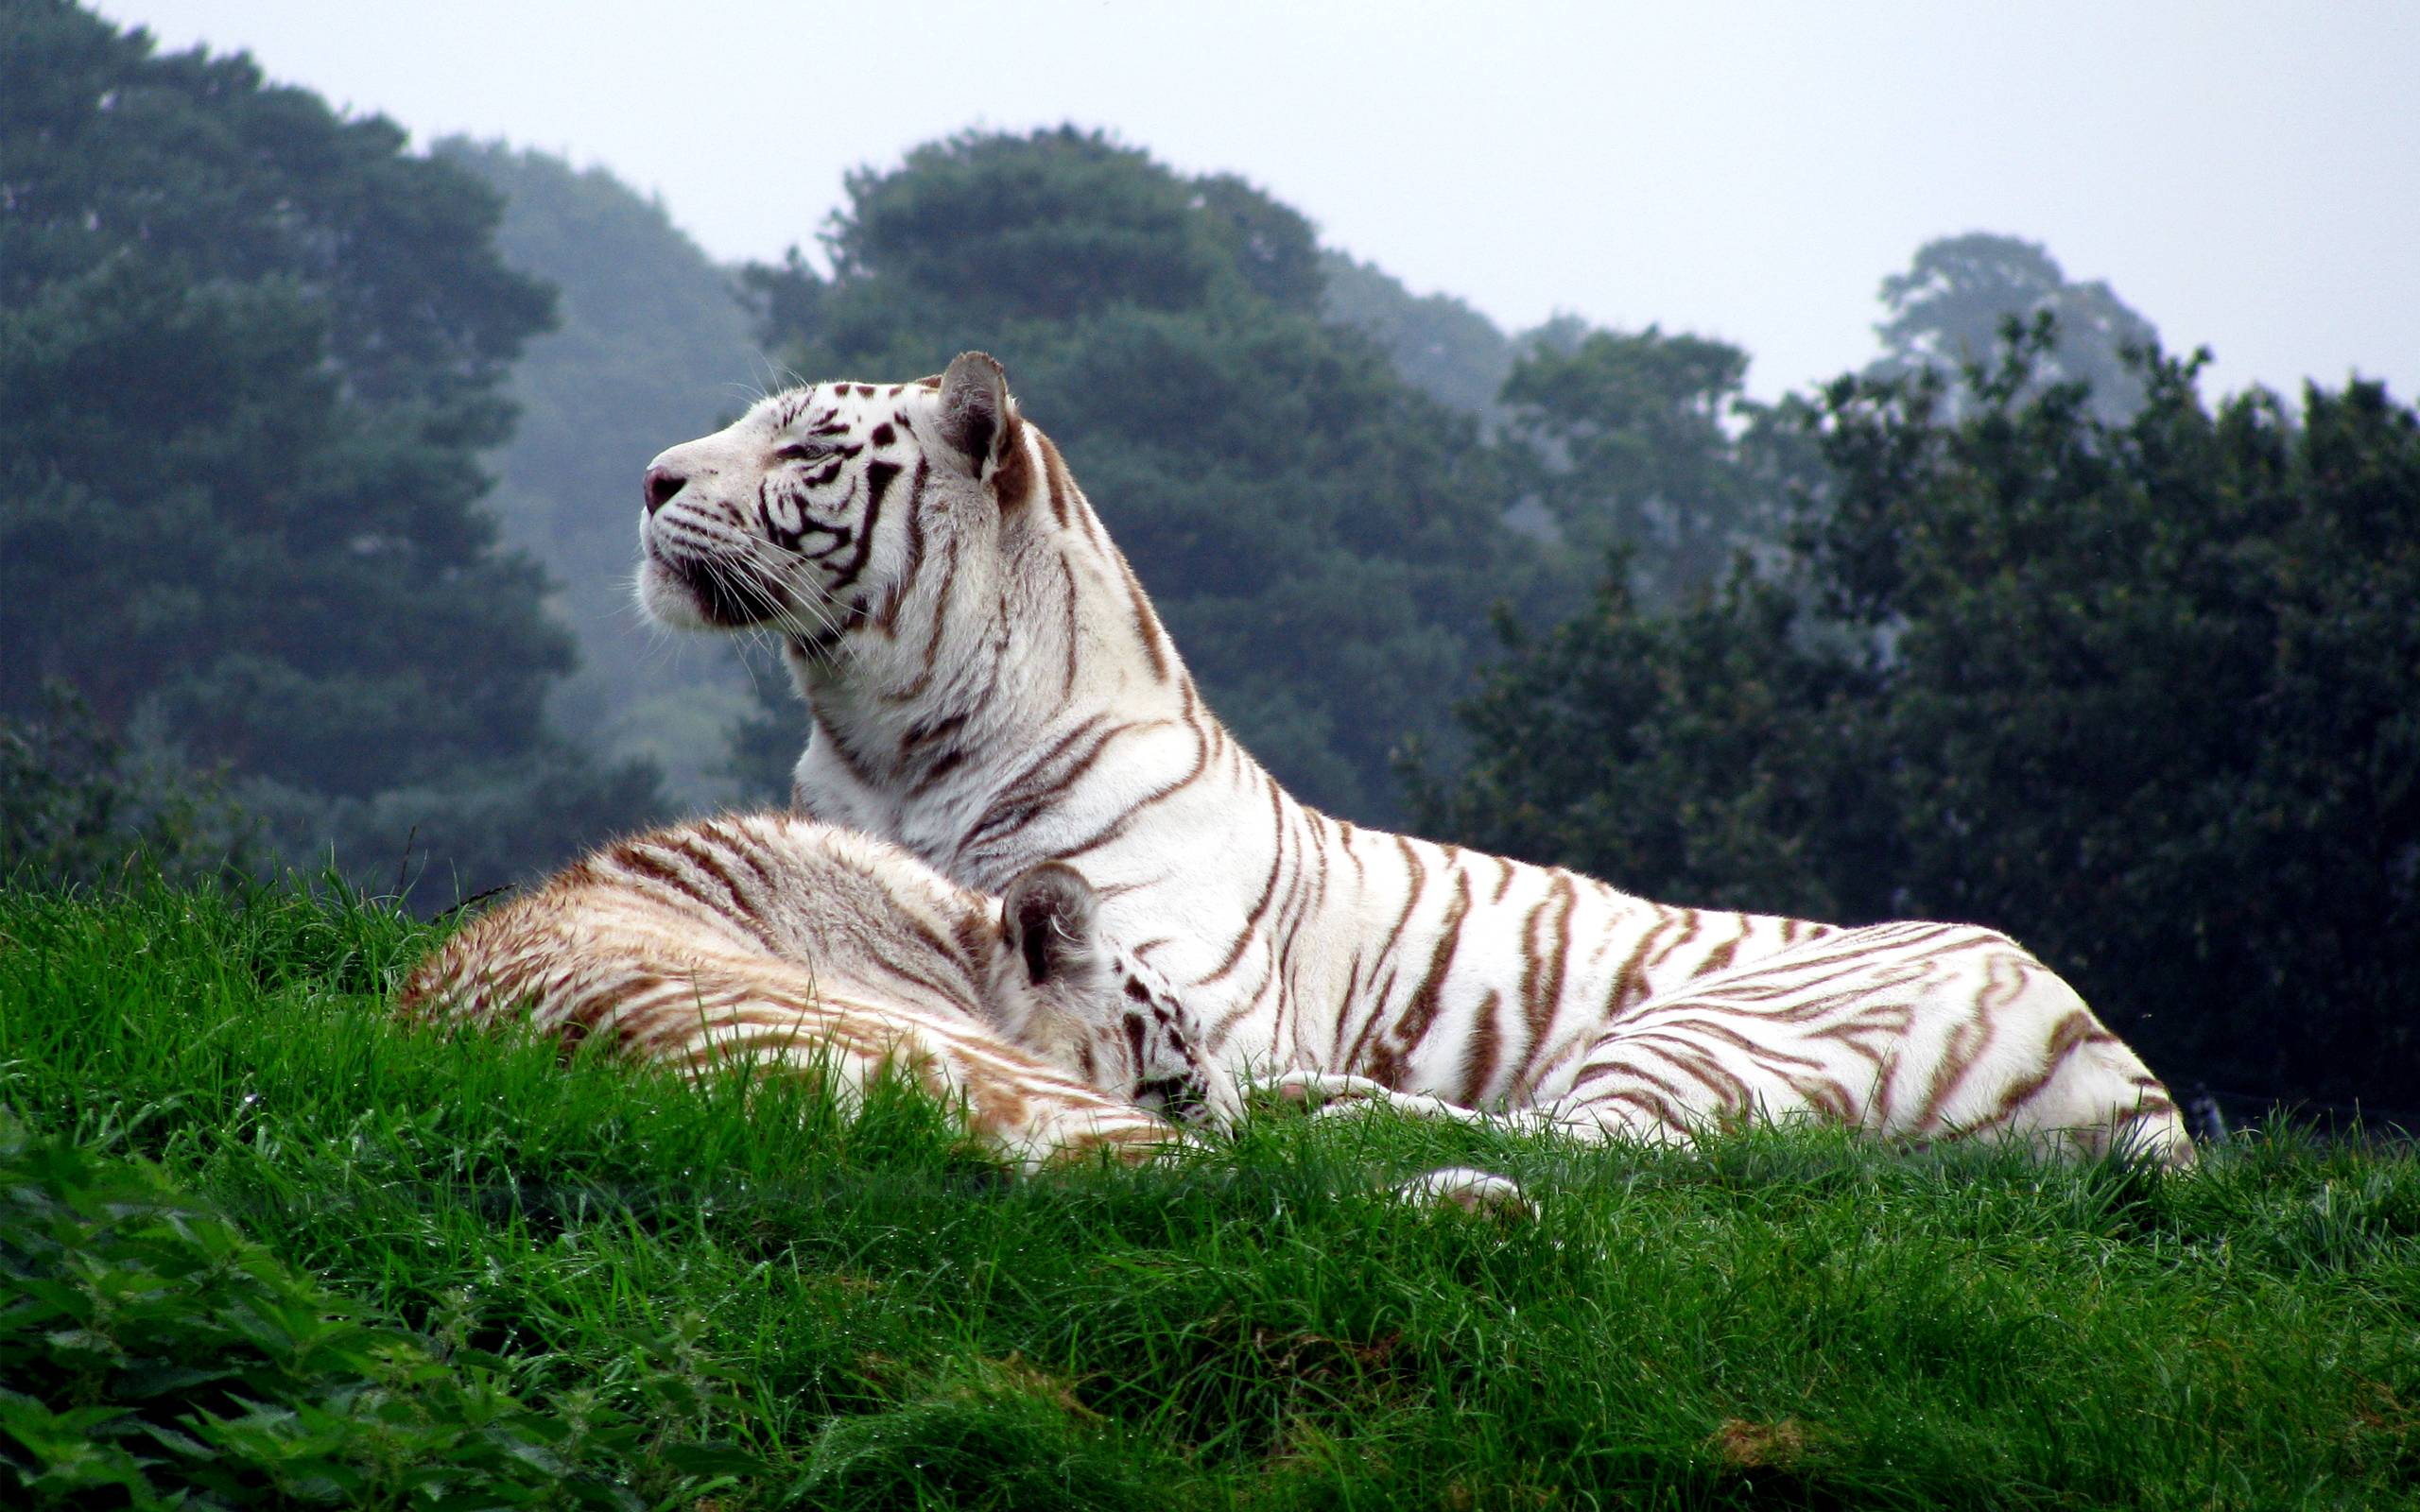 White Tigers Wallpapers